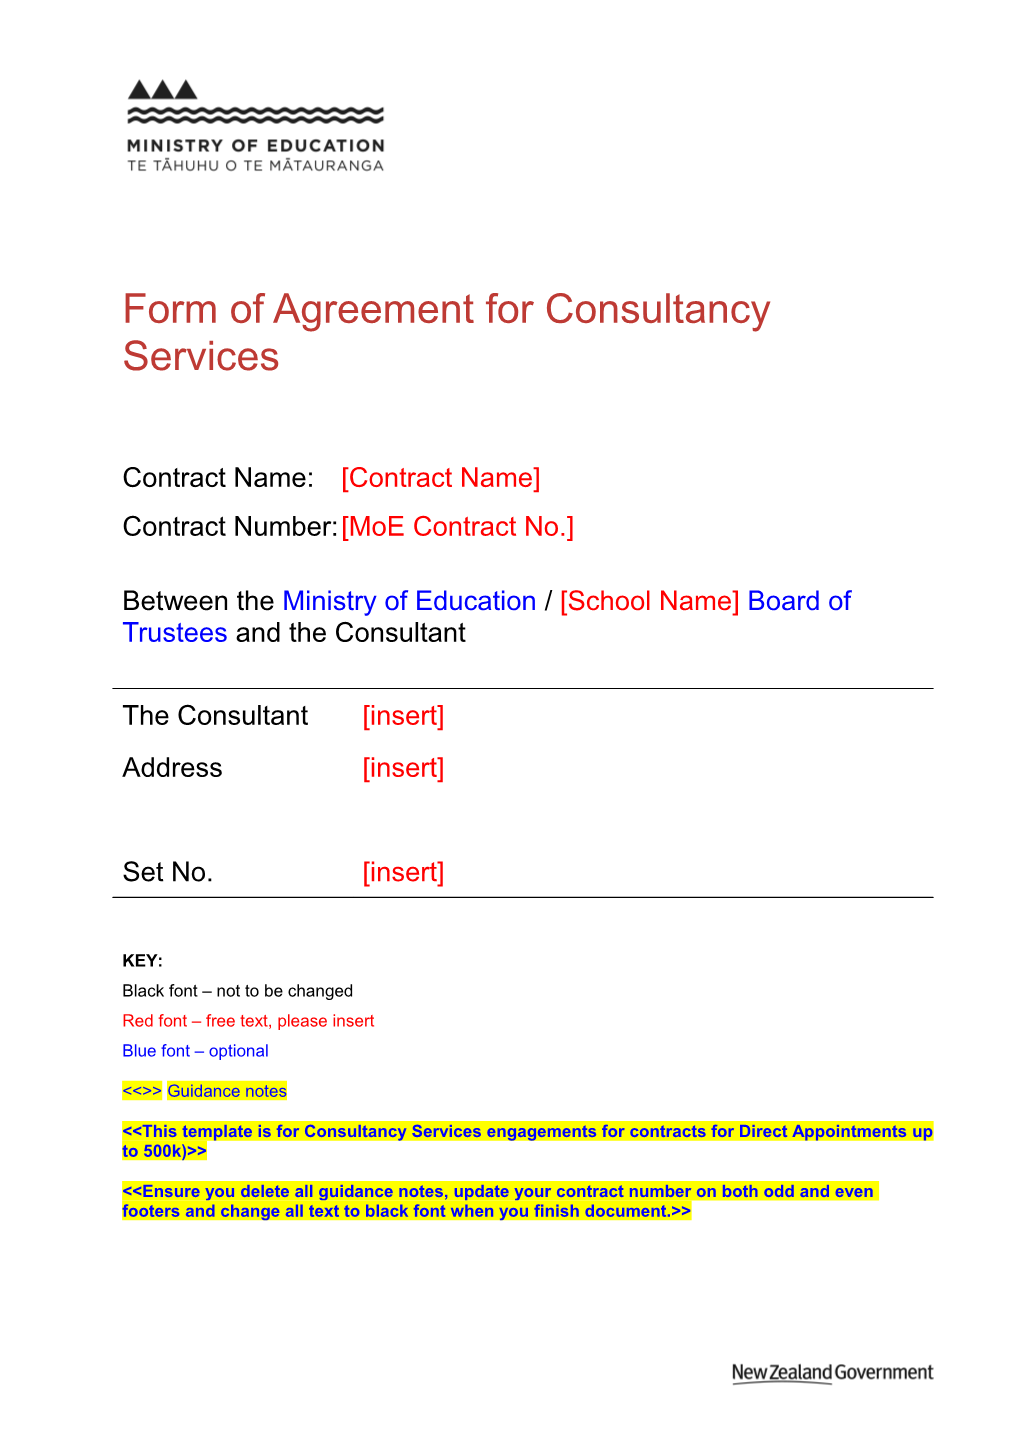 Form of Agreement for Consultancy Services (Contract 4)